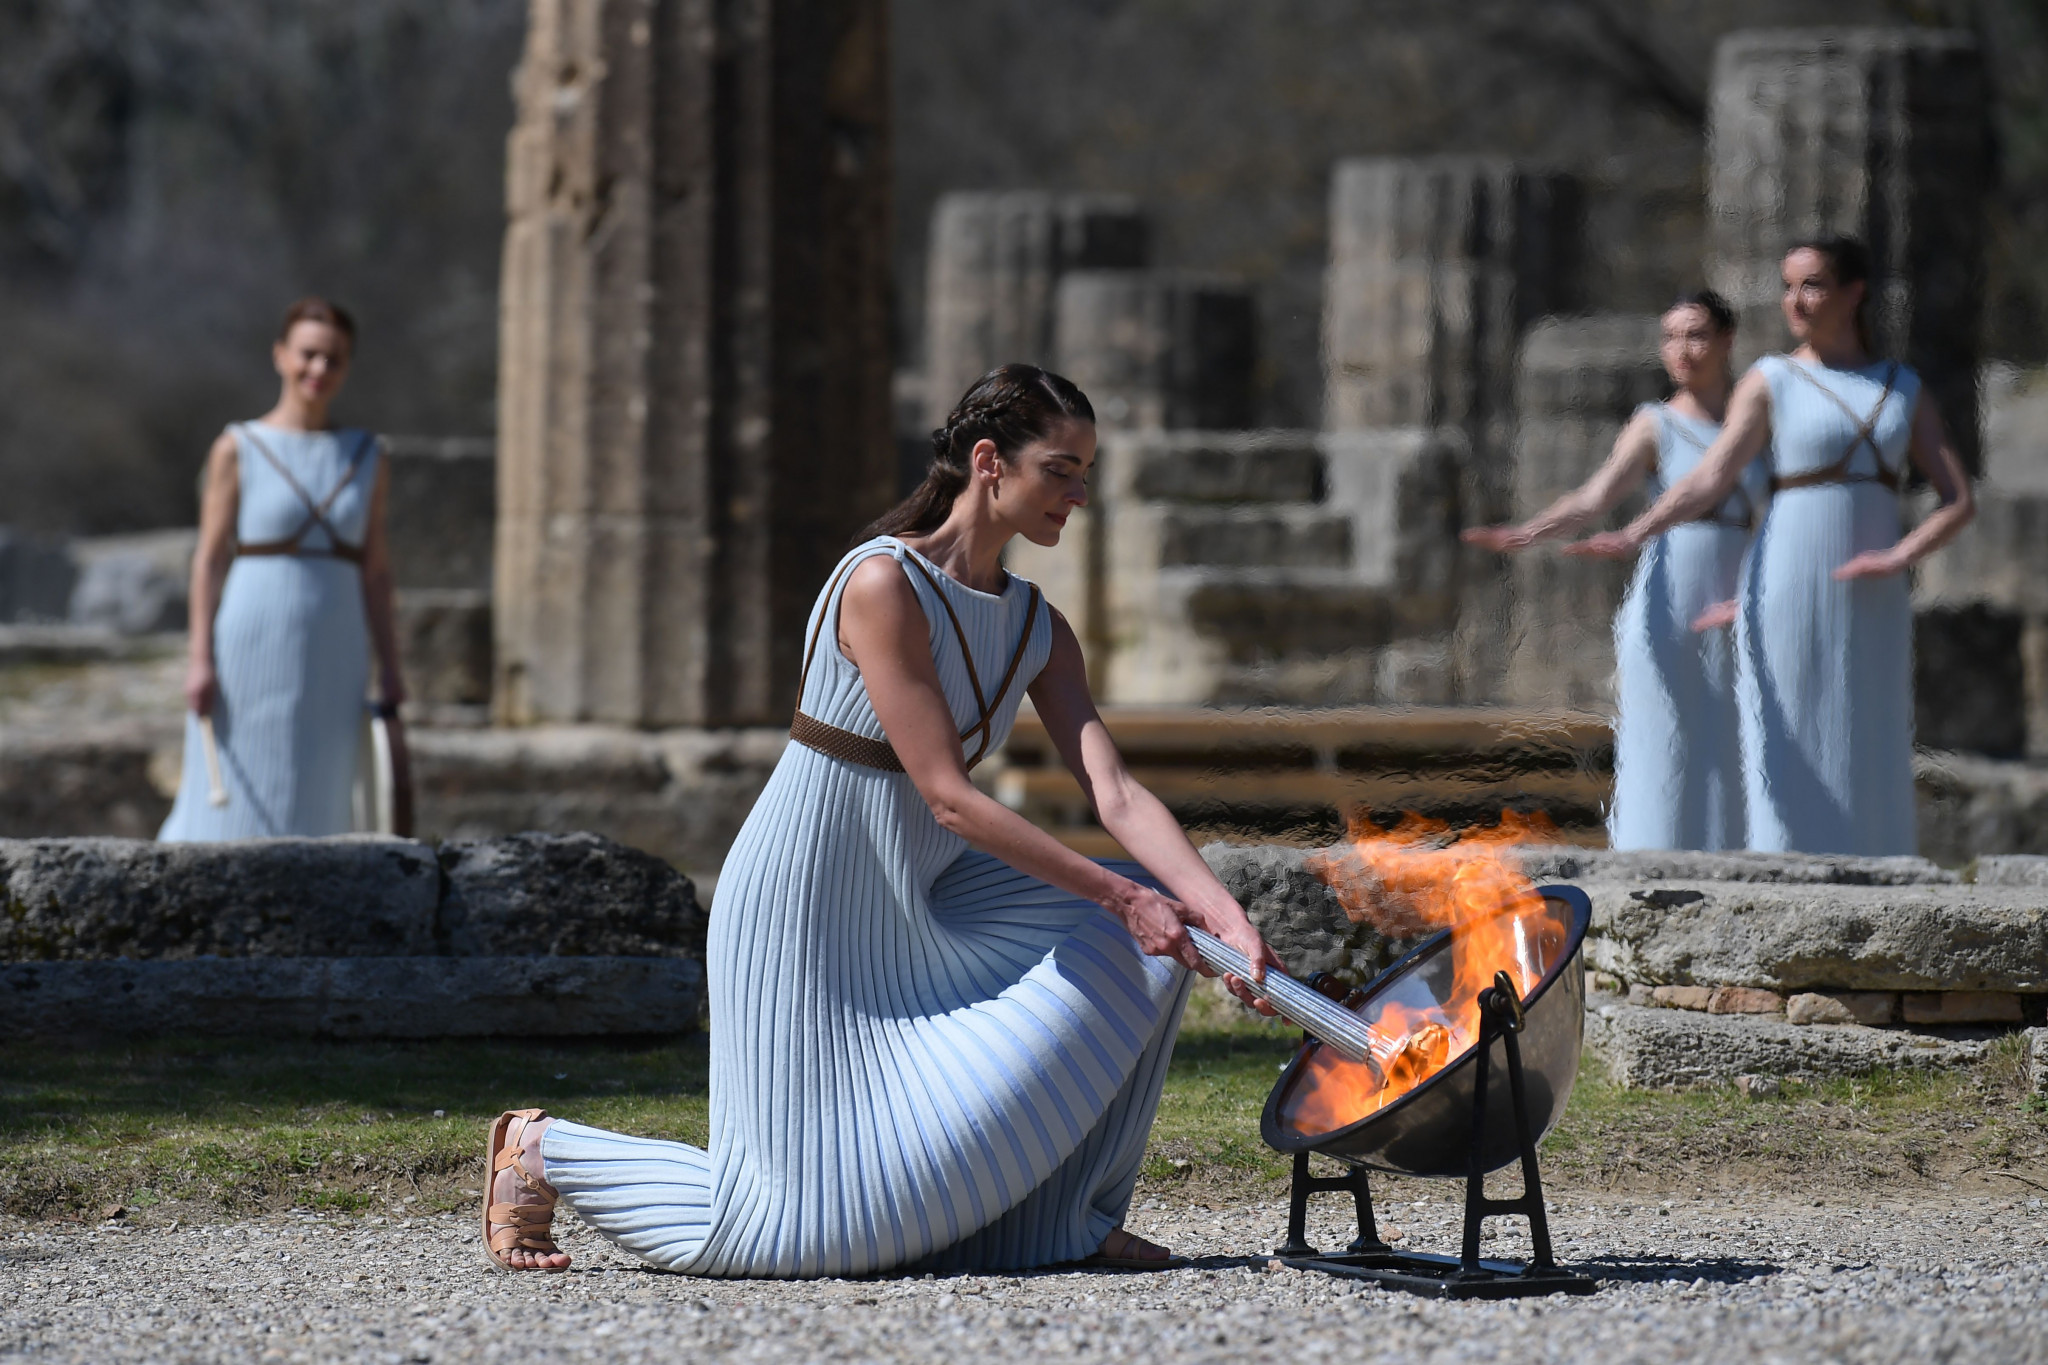 Ancient Olympia is due to stage the lighting of the Beijing 2022 Olympic Flame later this year ©Getty Images